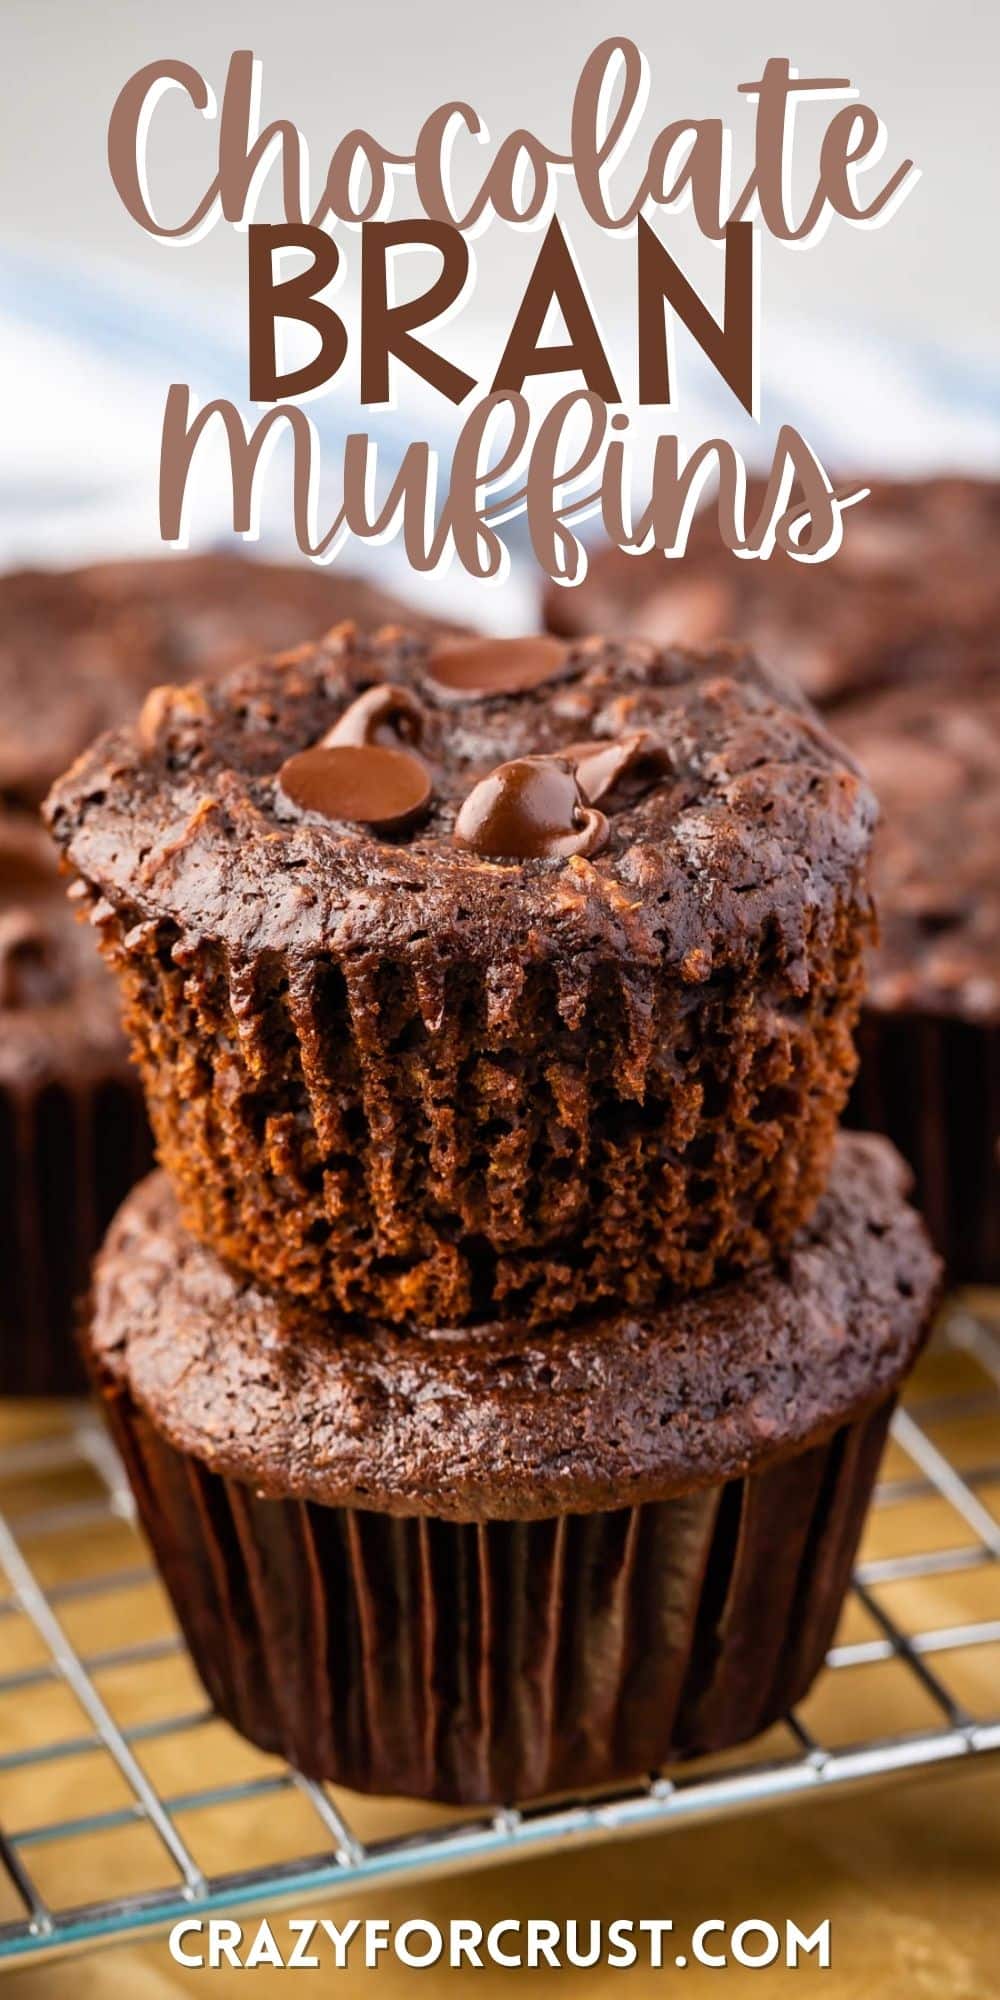 chocolate muffins with chocolate chips baked in with words on the photo